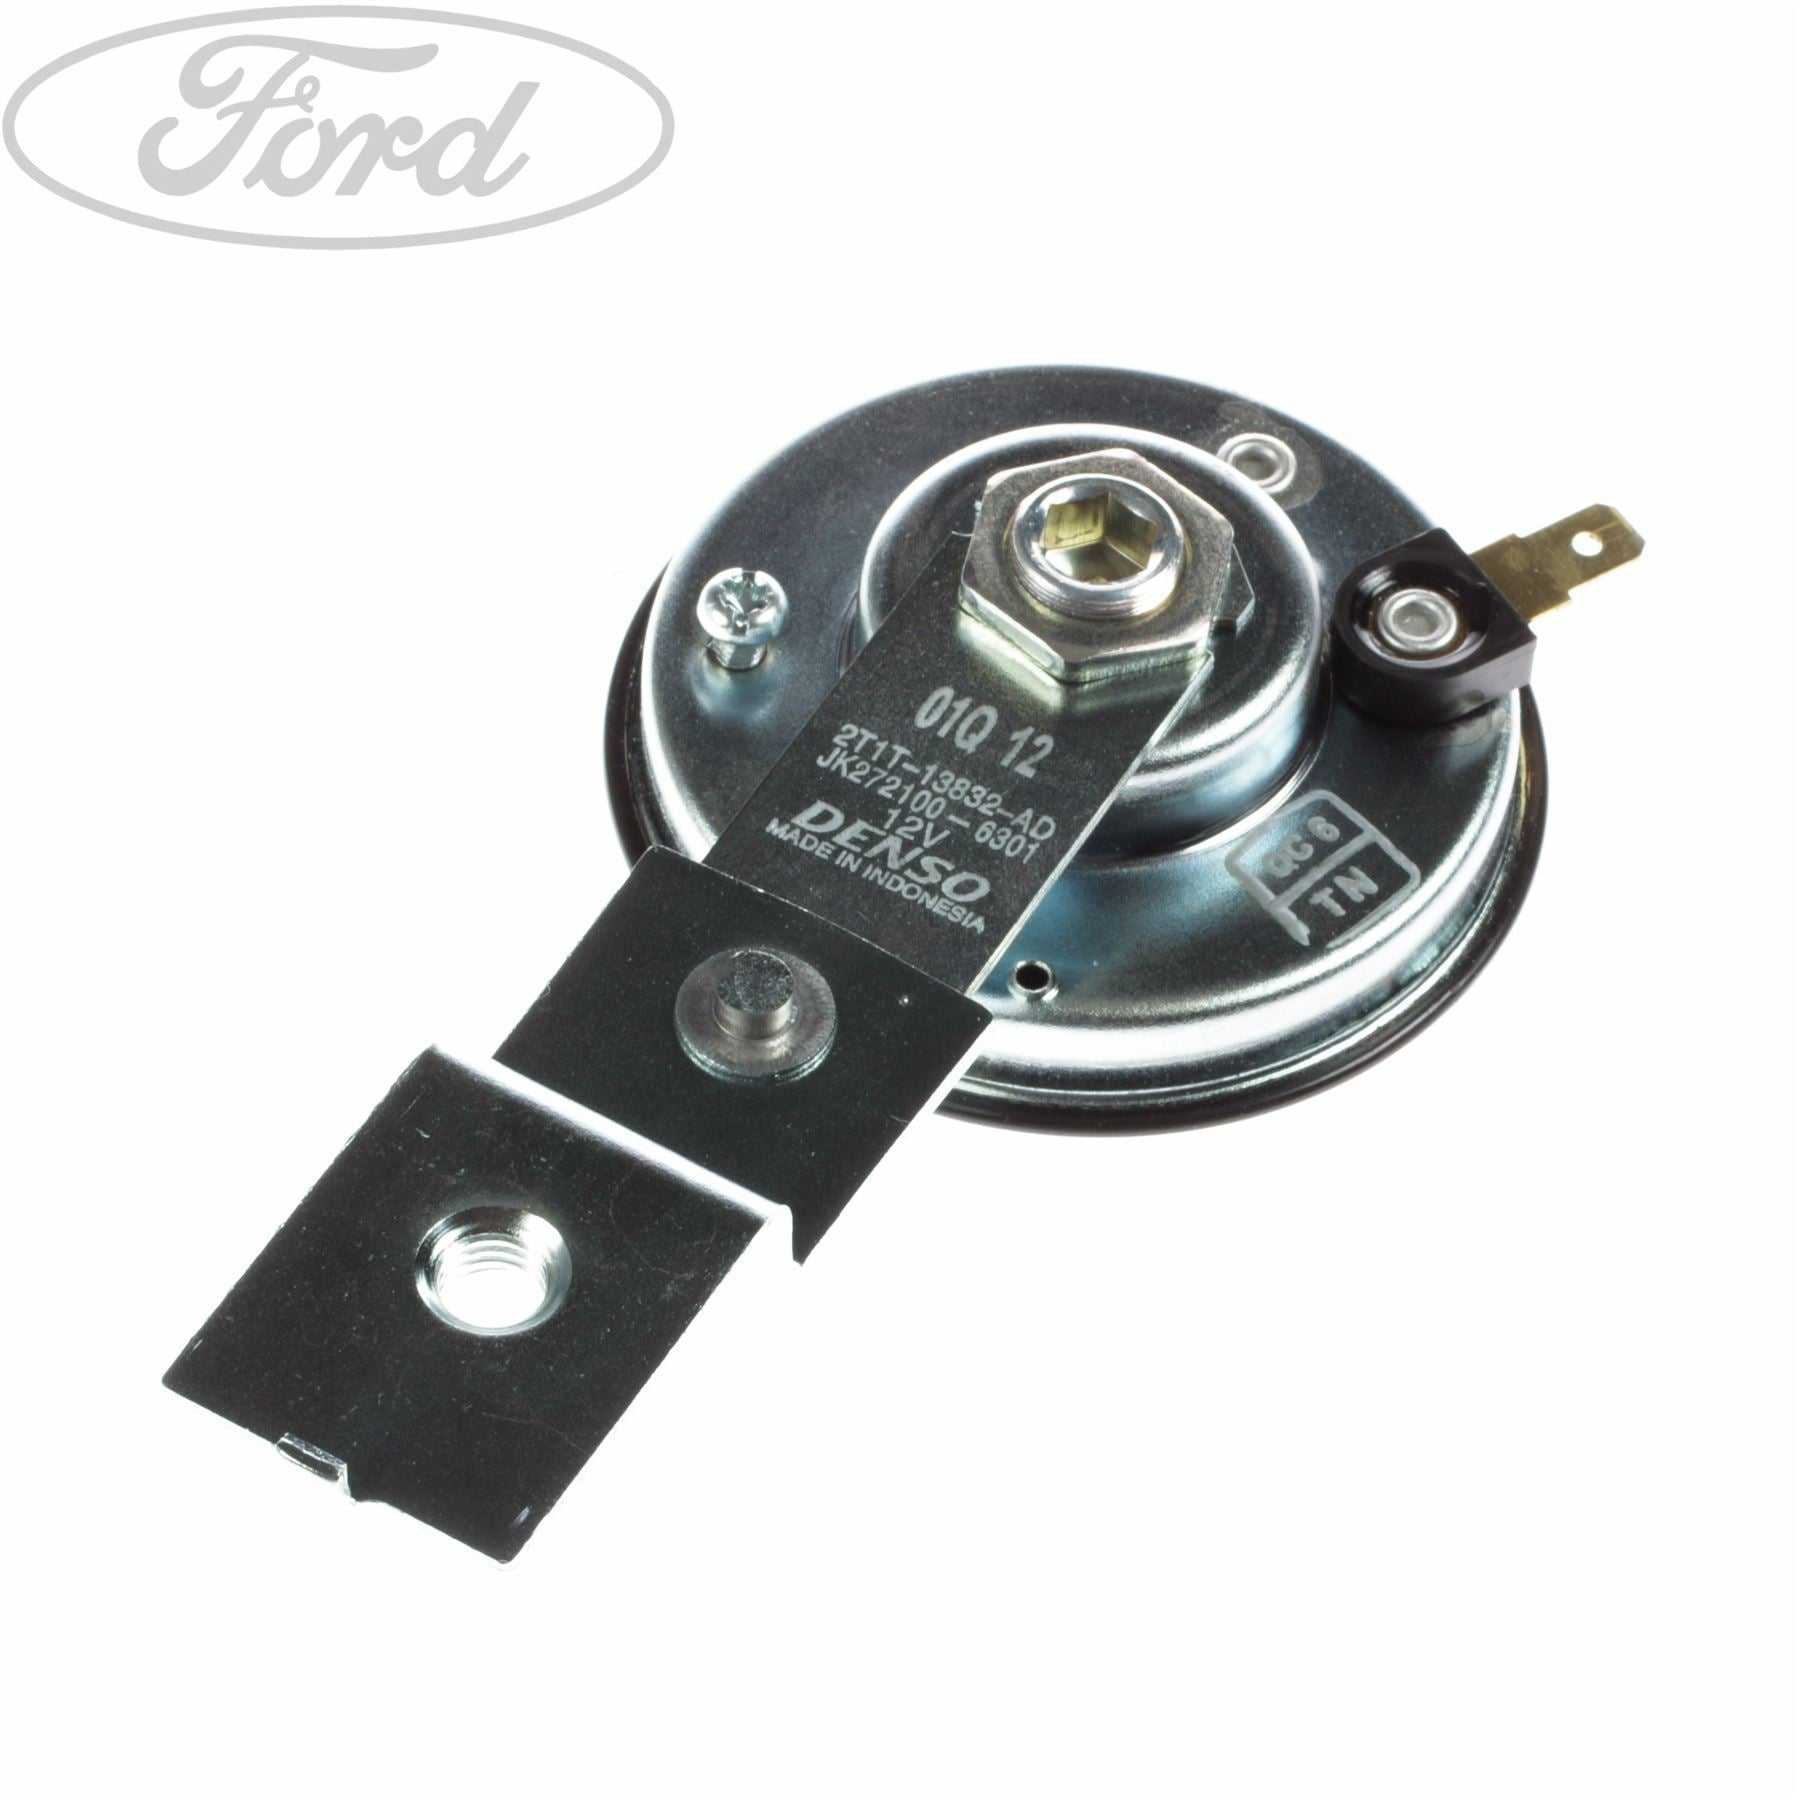 Ford, TRANSIT CONNECT CAR HORN 2002- 2013